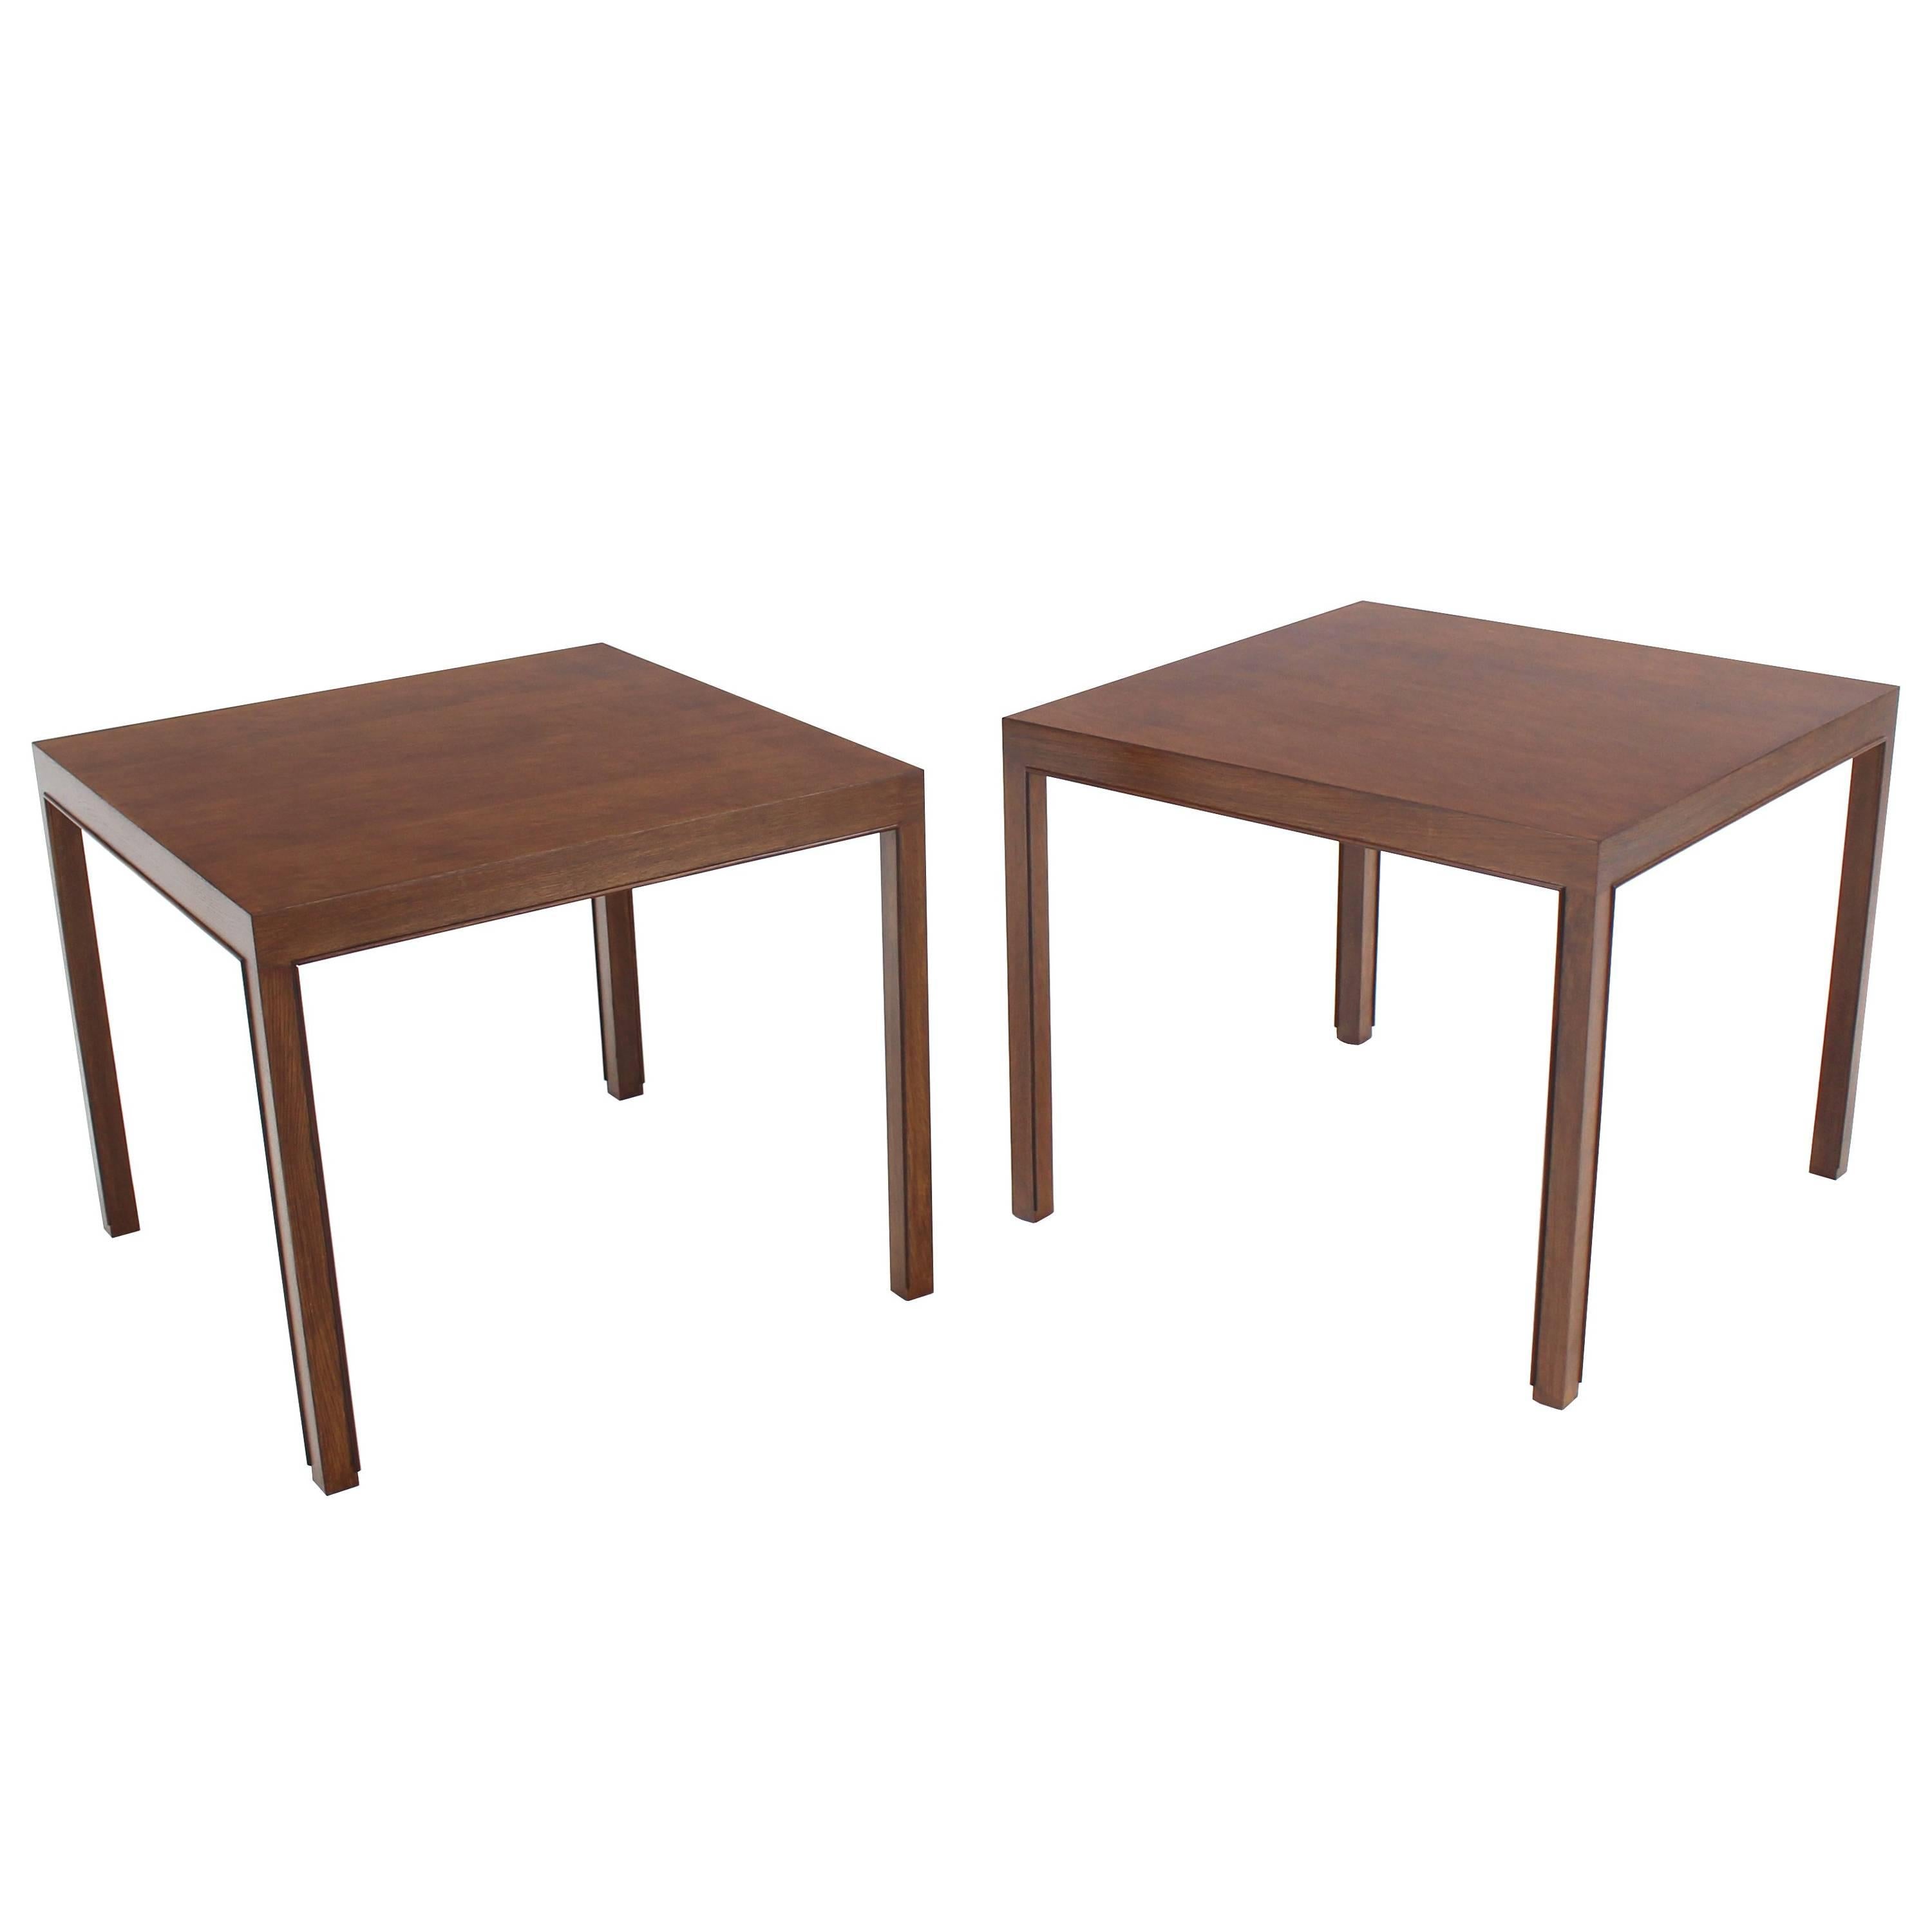 Pair of Large Square Lamp End Tables by Dunbar